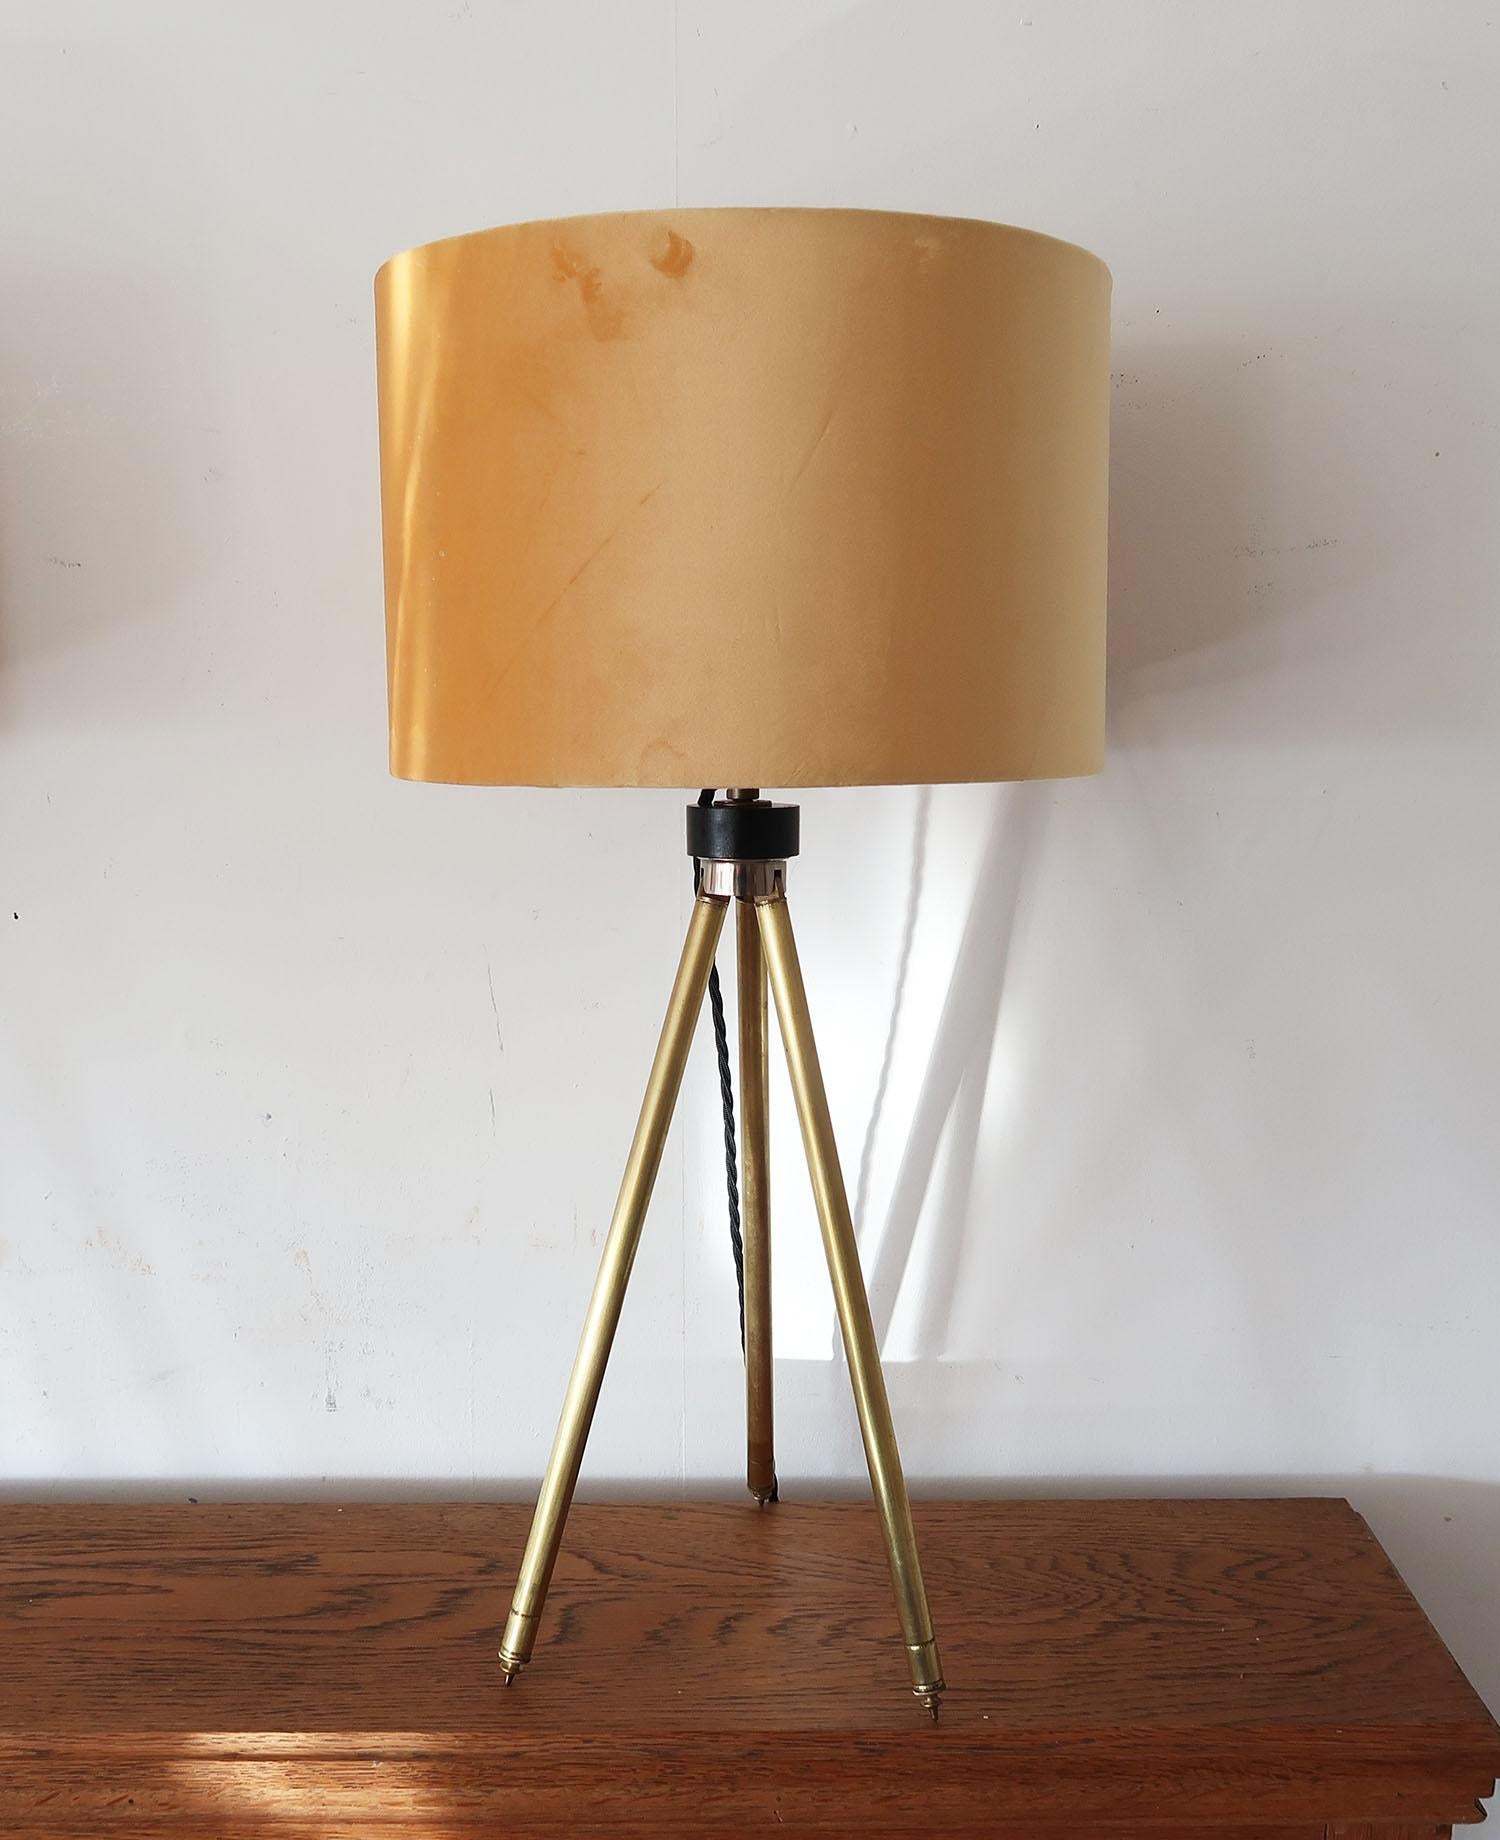 English Pair of Midcentury Brass Telescopic Tripod Table Lamps